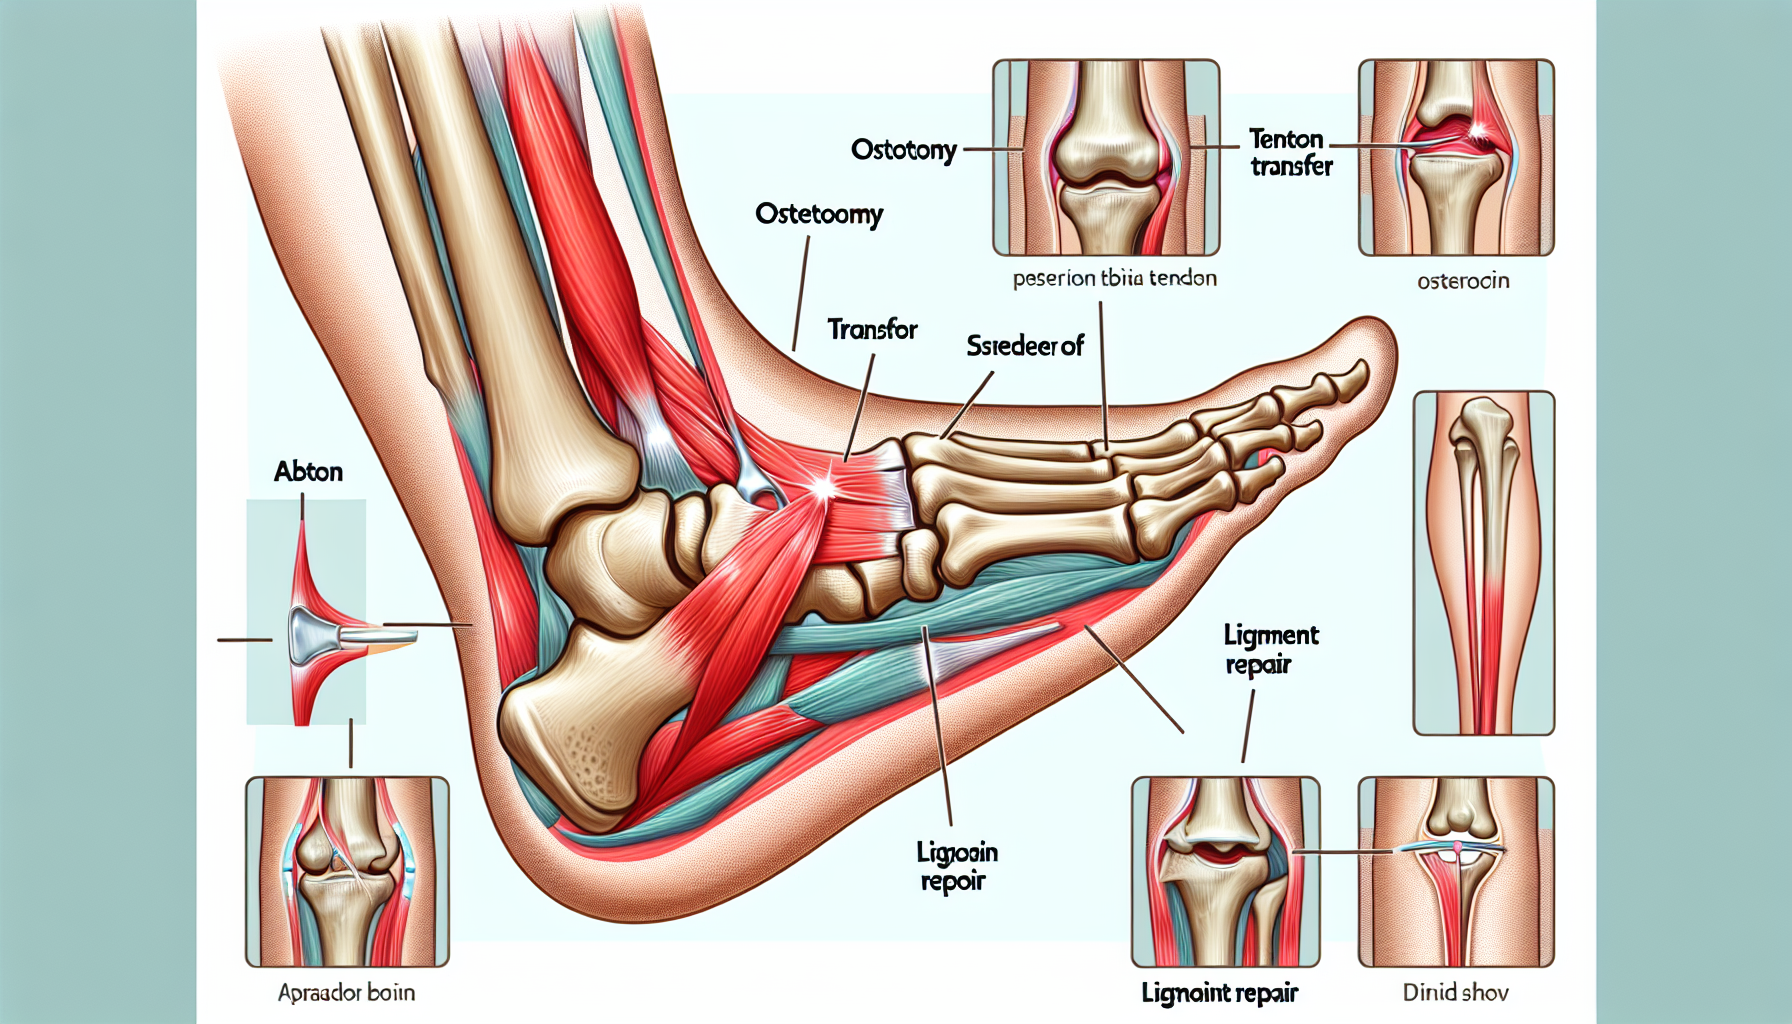 Illustration of surgical treatment options for posterior tibial tendon dysfunction